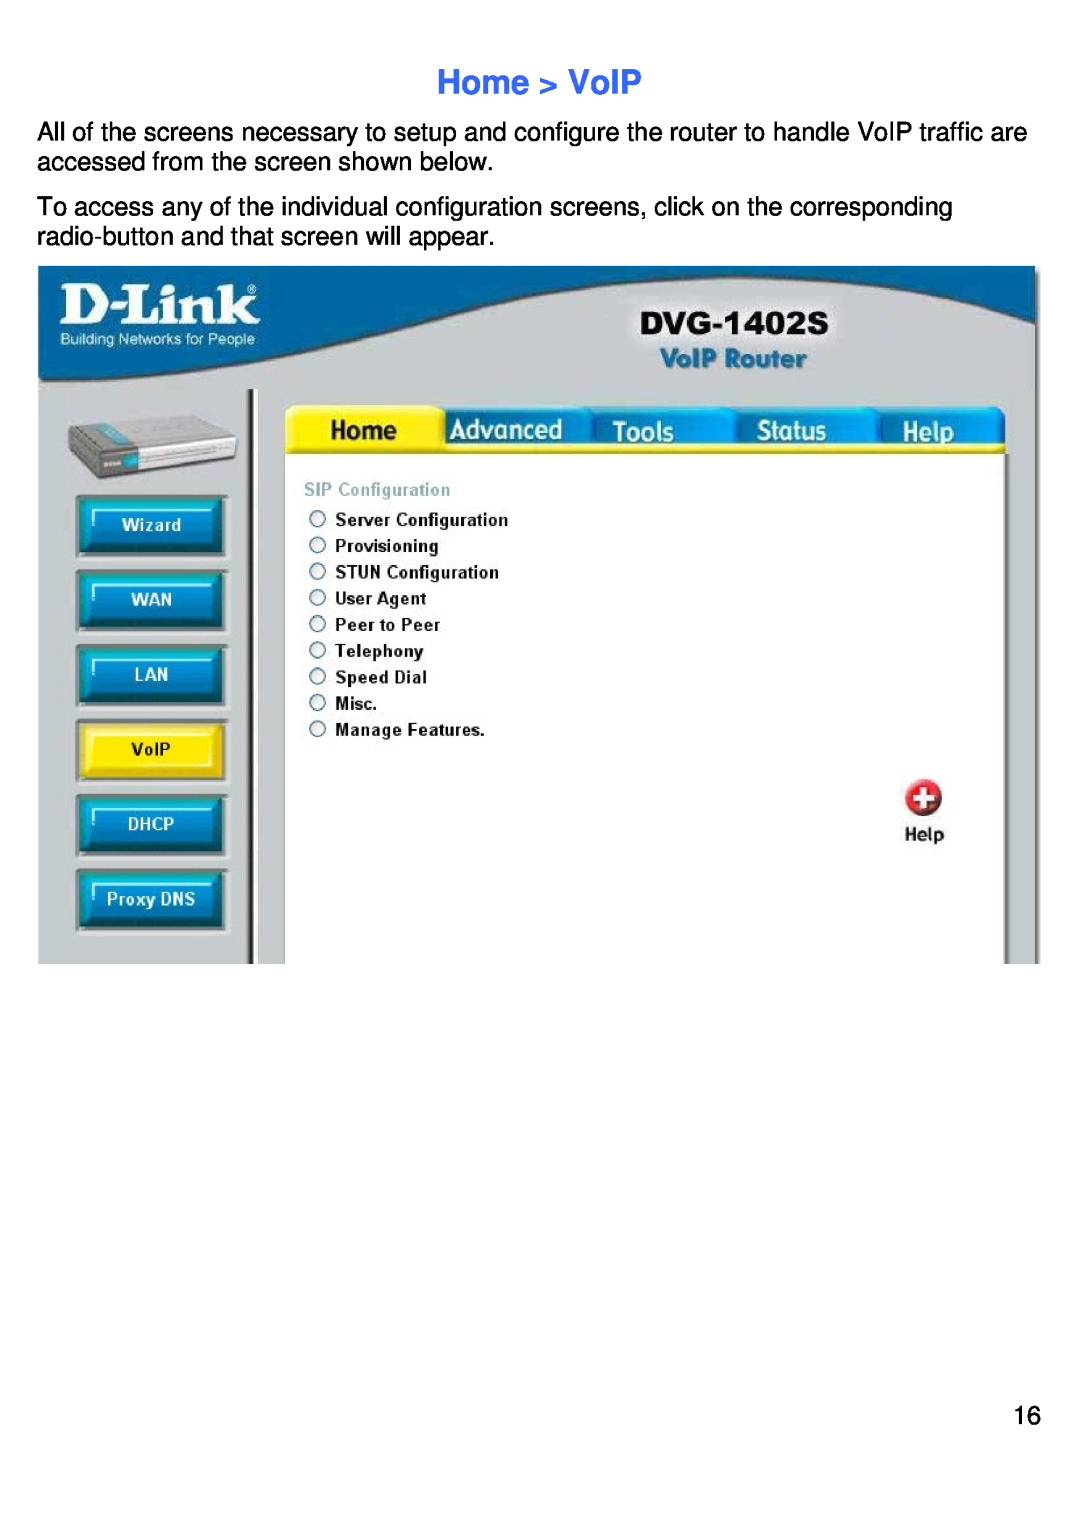 D-Link DVG-1402S manual Home VoIP 